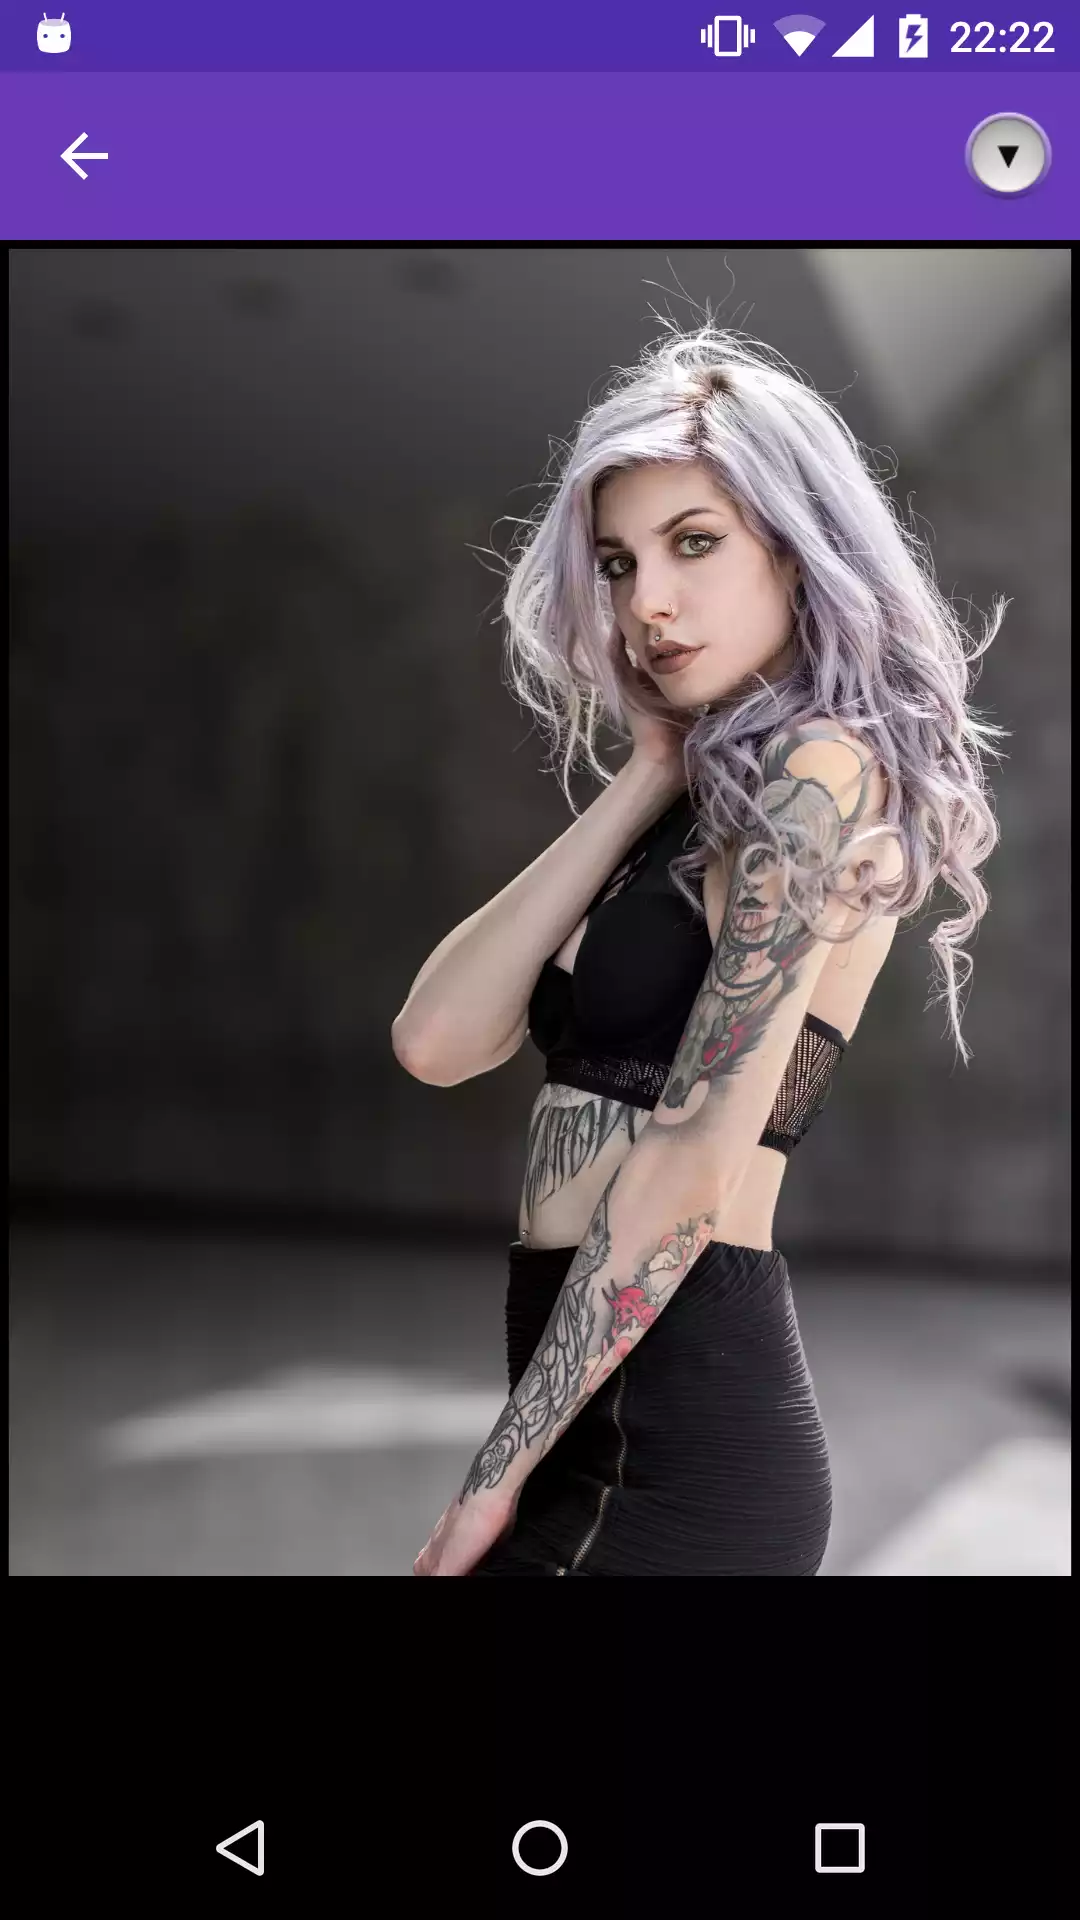 Tattoo Wallpapers and,gallery,sex,image,puzzles,adult,pornstars,girls,hentai,for,game,apps,apk,comic,download,phone,panties,sexy,app,amateur,erotic,android,comics,tattoo,wallpapers,lisa